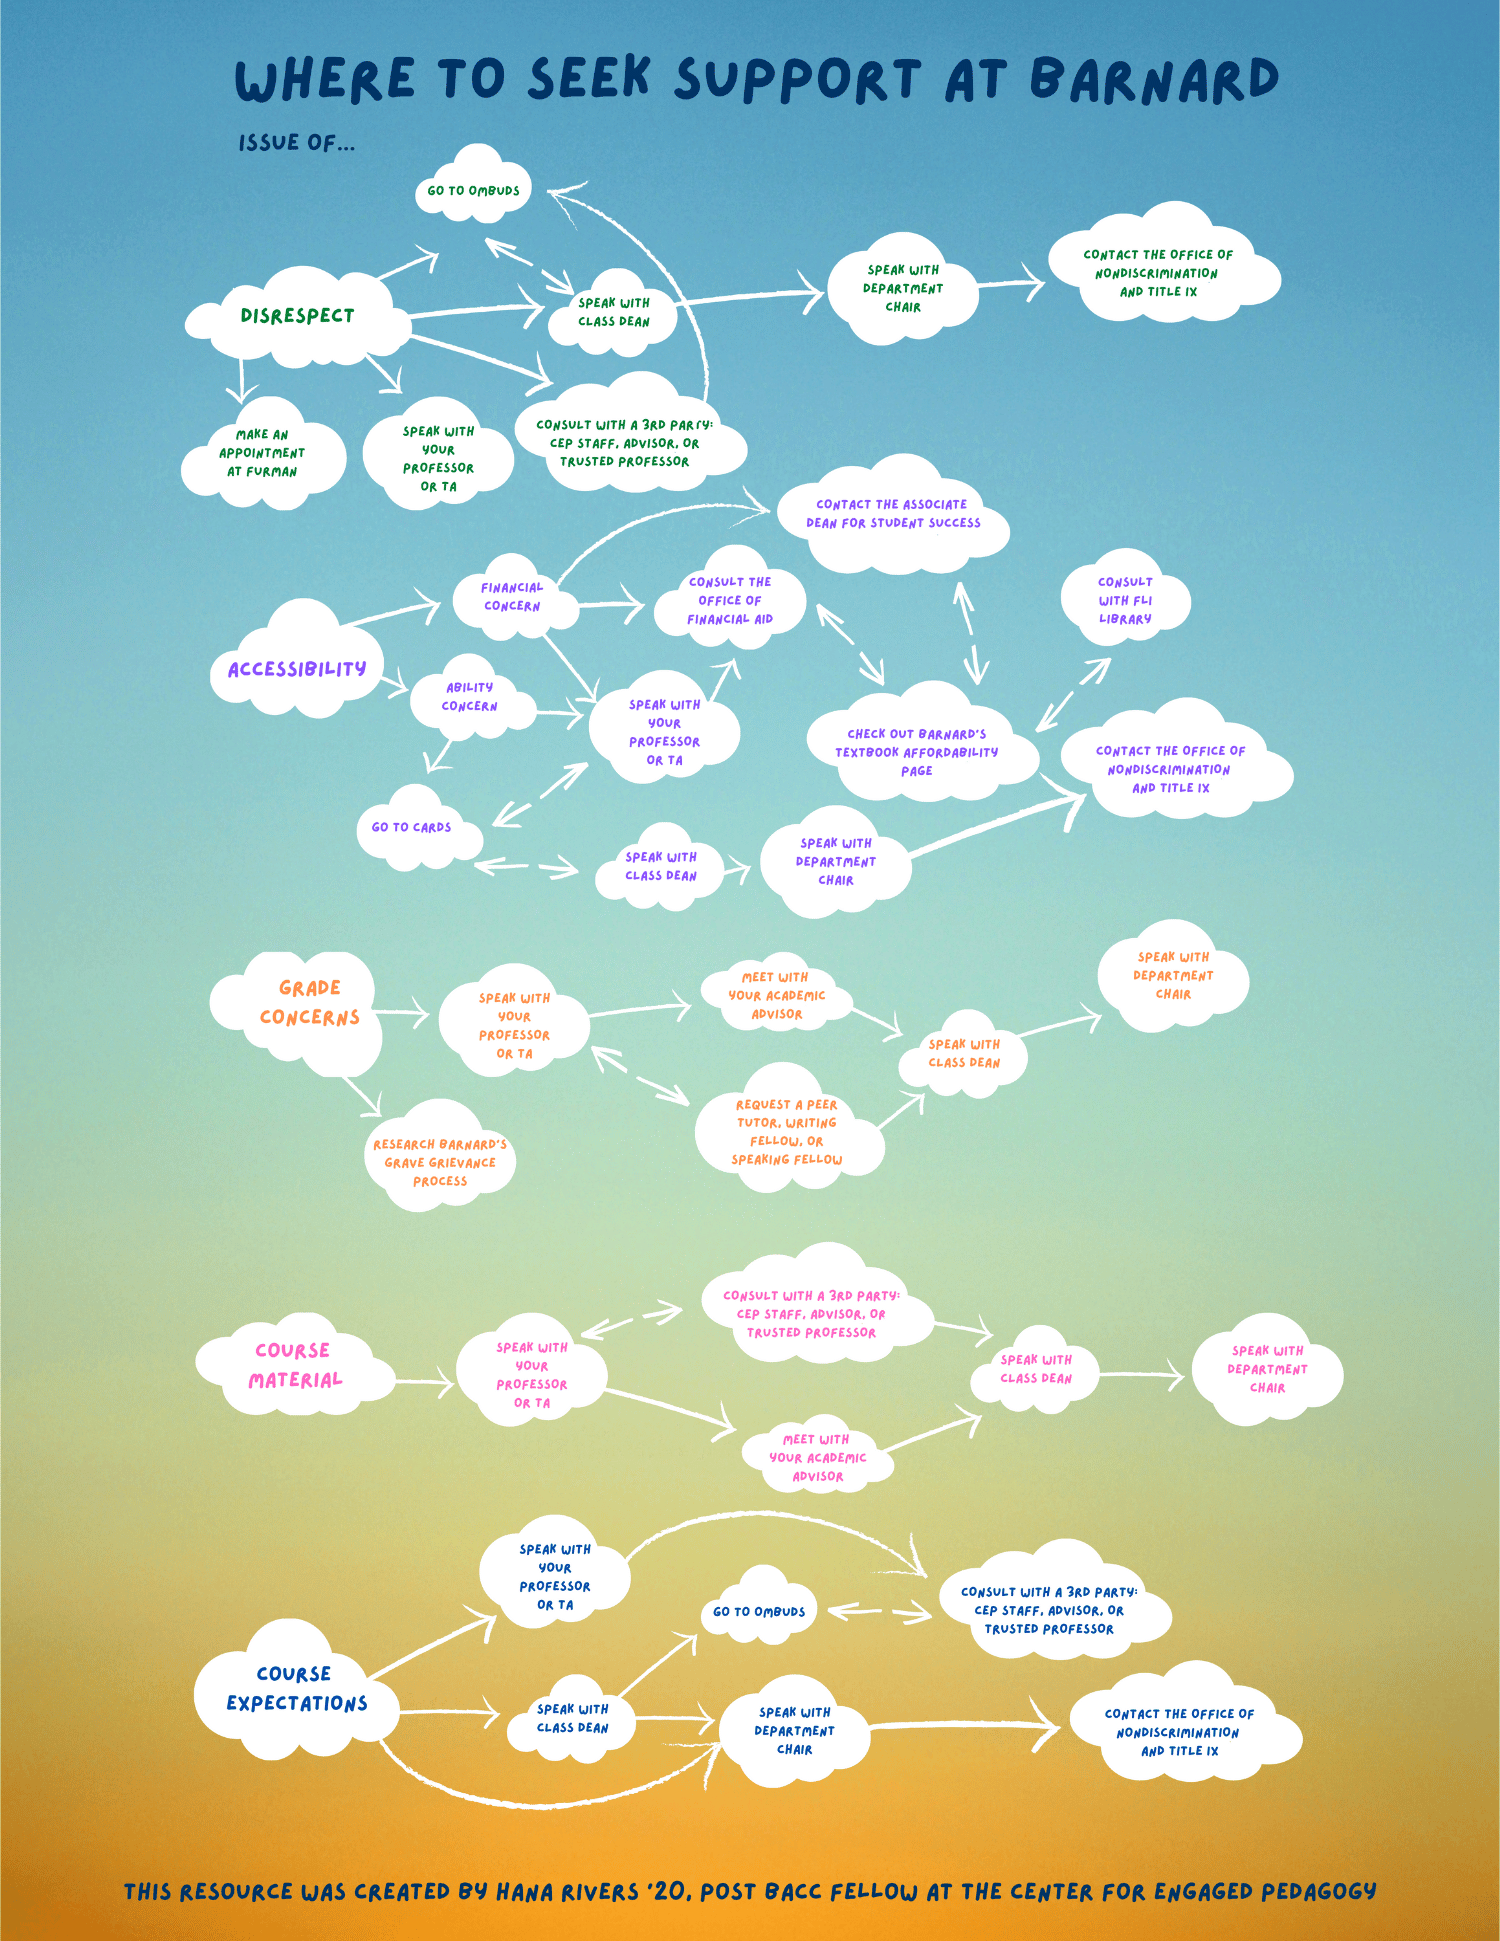 Rainbow gradient background covered in a series of small clouds representing a flowchart for students to seek support regarding issues of disrespect, accessibility, grade concerns, course material, and course expectations at Barnard.